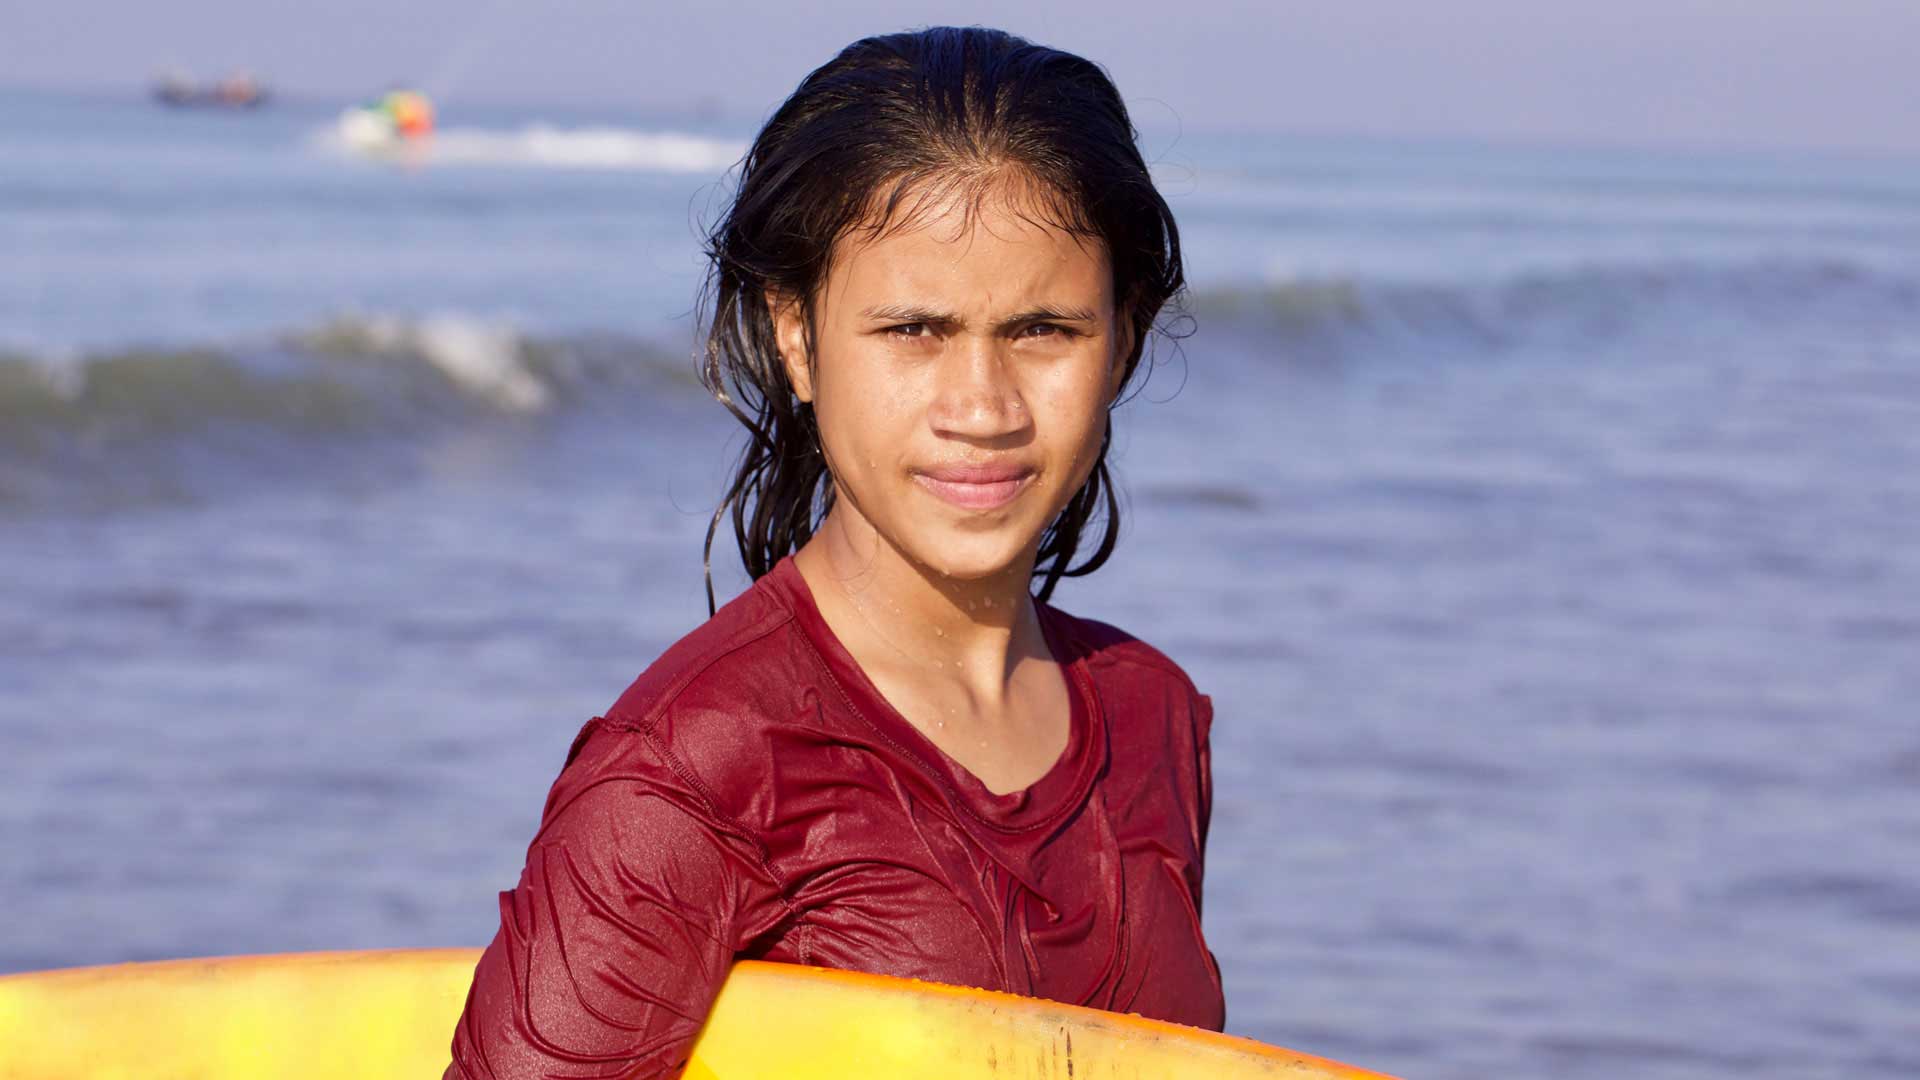 A young woman with wet hair, holding her surfboard, looks into the the camera with a confident and determined expression.